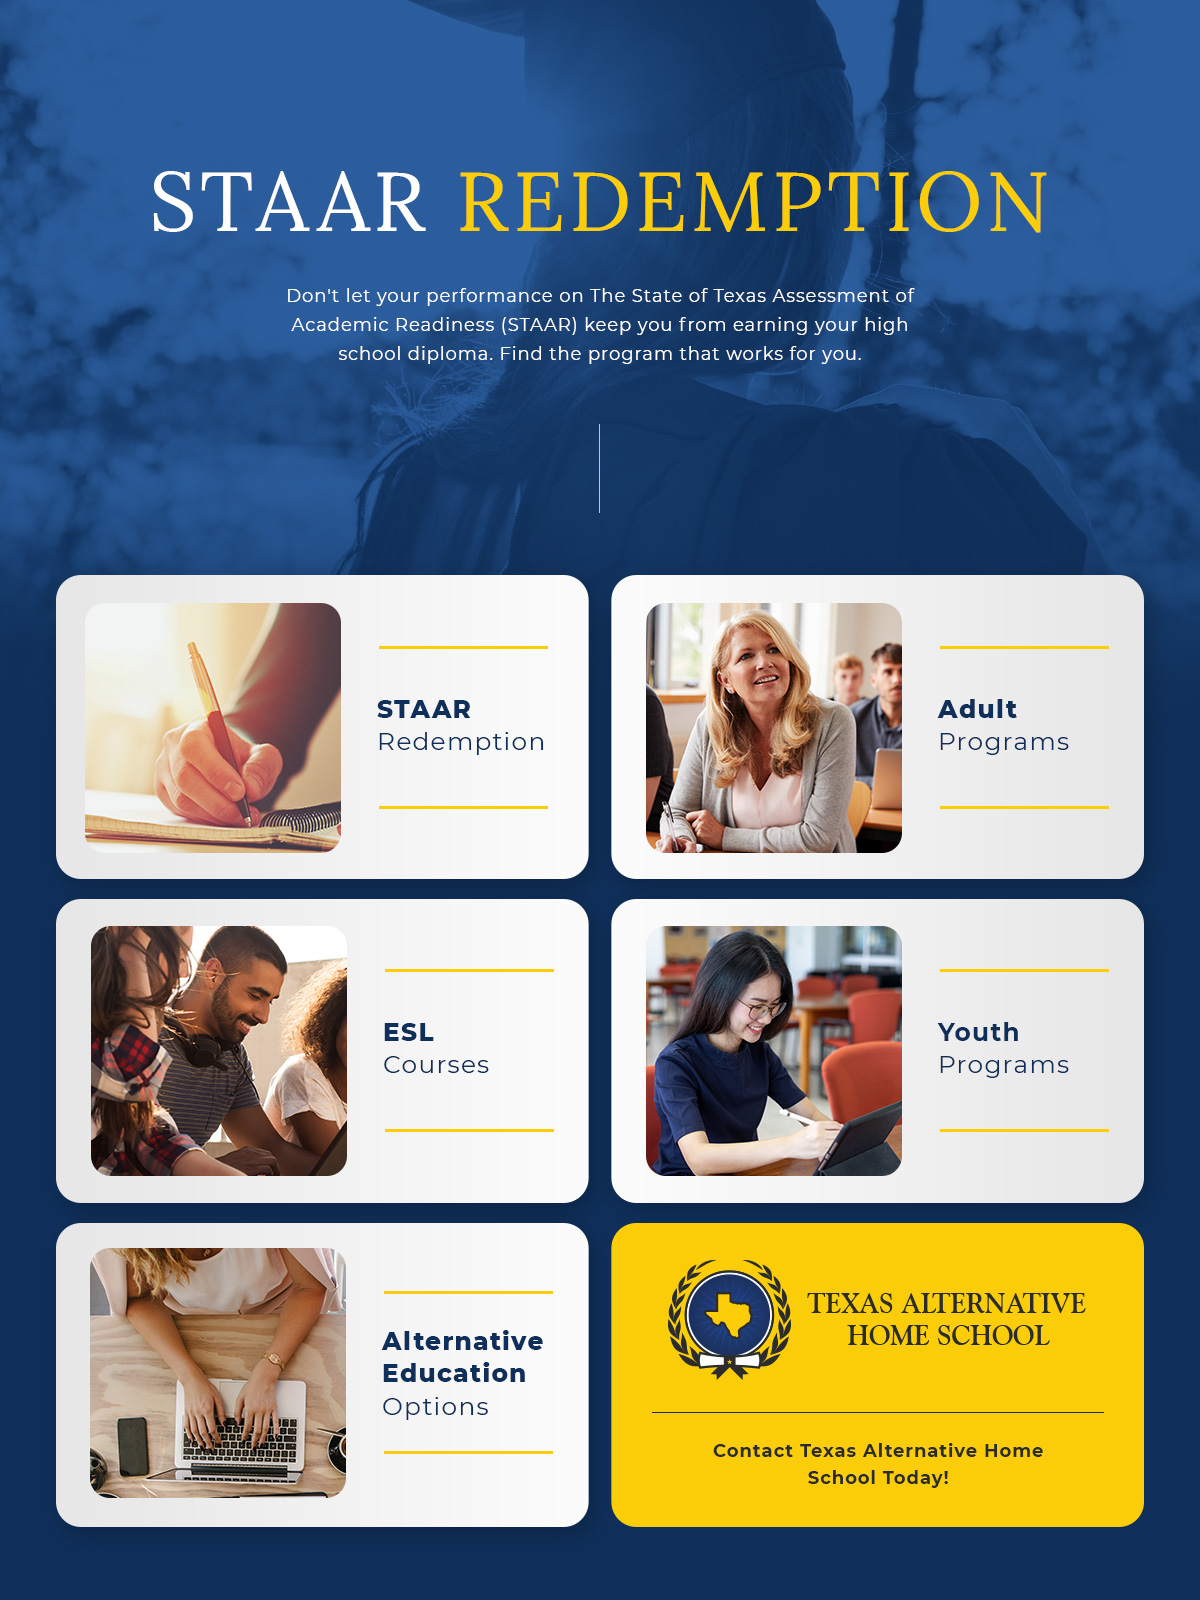 Staar-Redemption-Infographic-60a3e8c4b3447